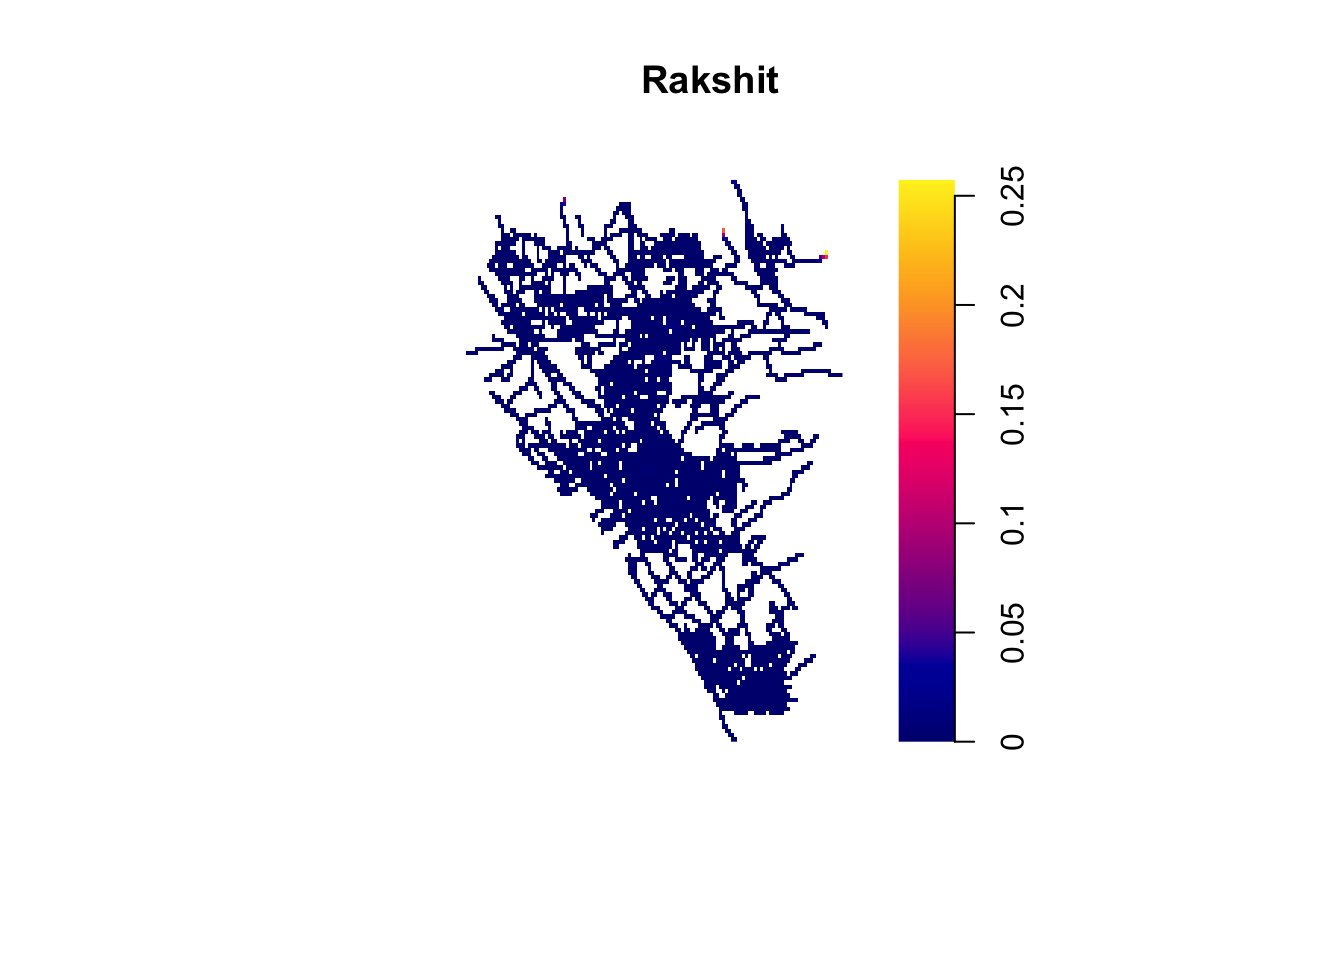 Once again we have a shaded street map of Heswall titled 'Rakshit', with a similar legend, which ranges from zero to point two five this time. Most of Heswall is dark blue, with only the ends of two roads near the top right brightening to yellow.